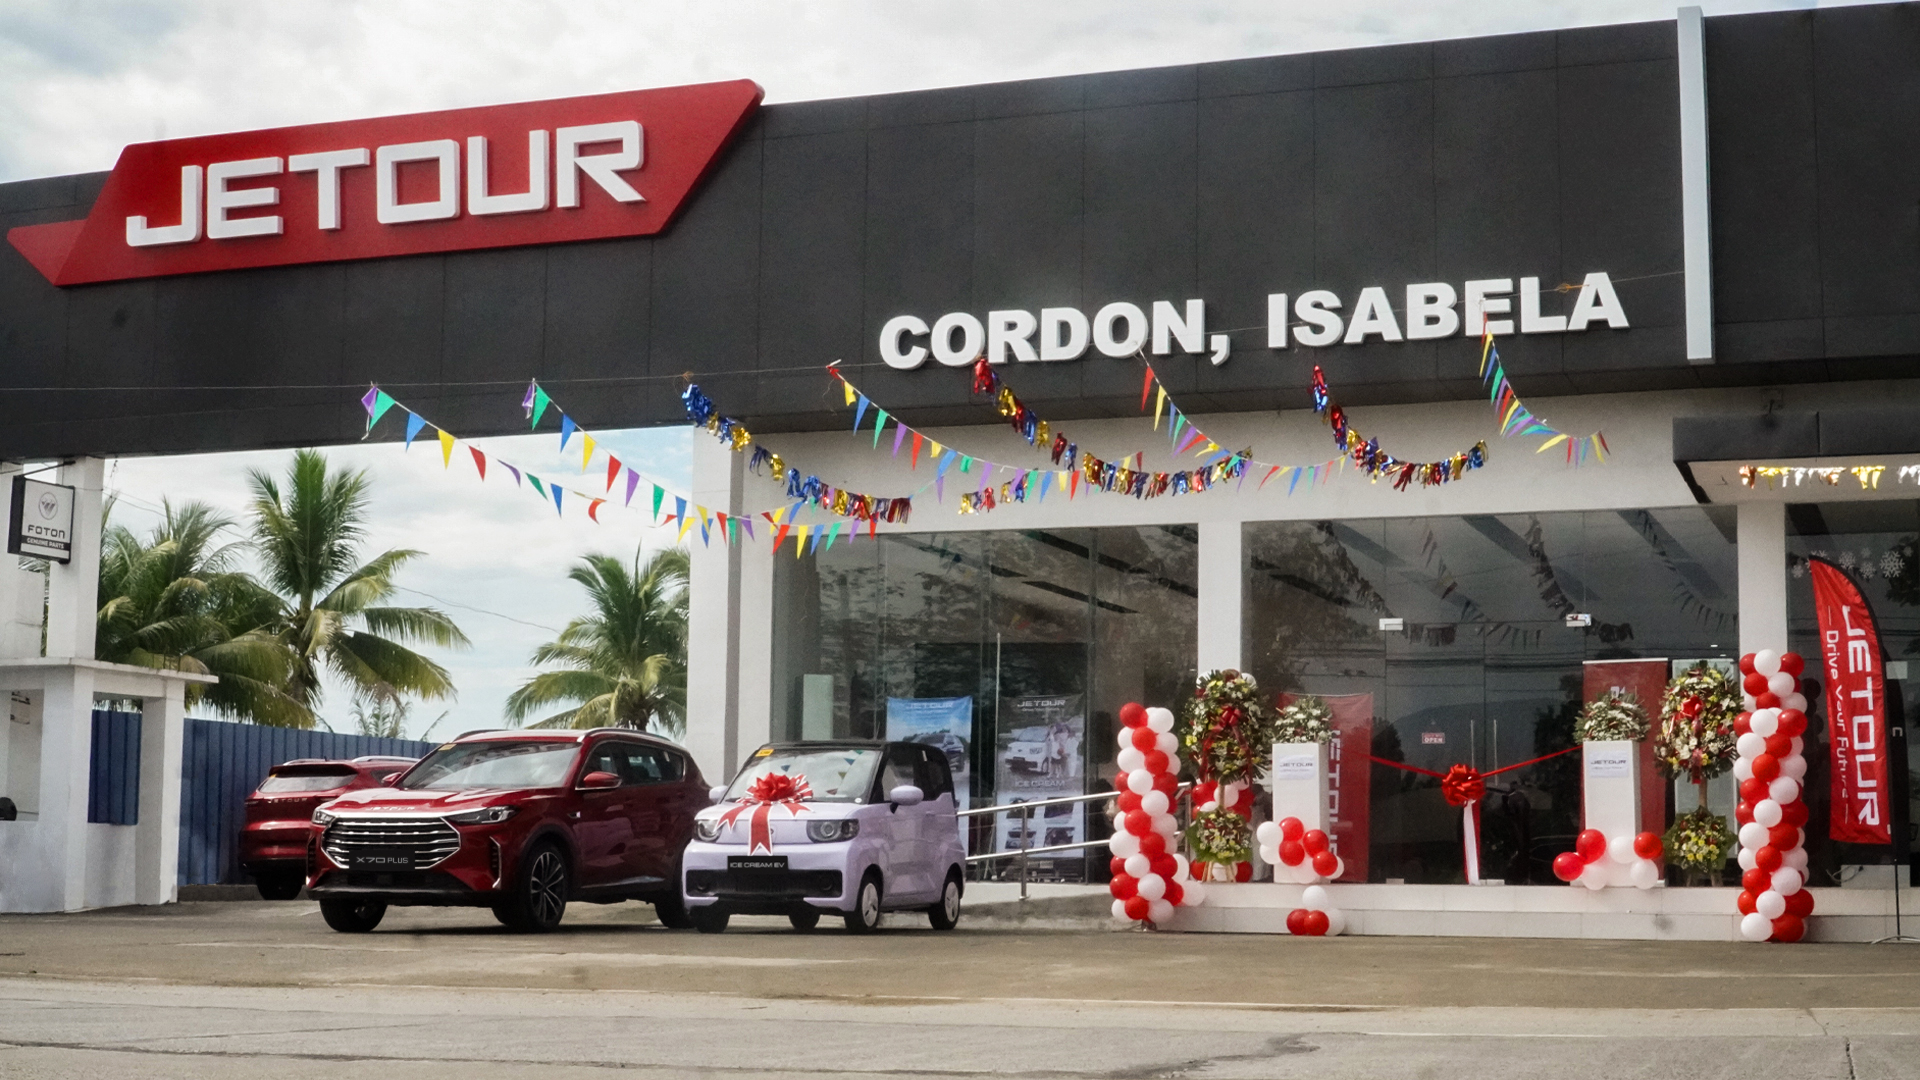 JETOUR Auto Phil Inc. is expanding its heritage in Luzon by inaugurating a new dealership in Isabela